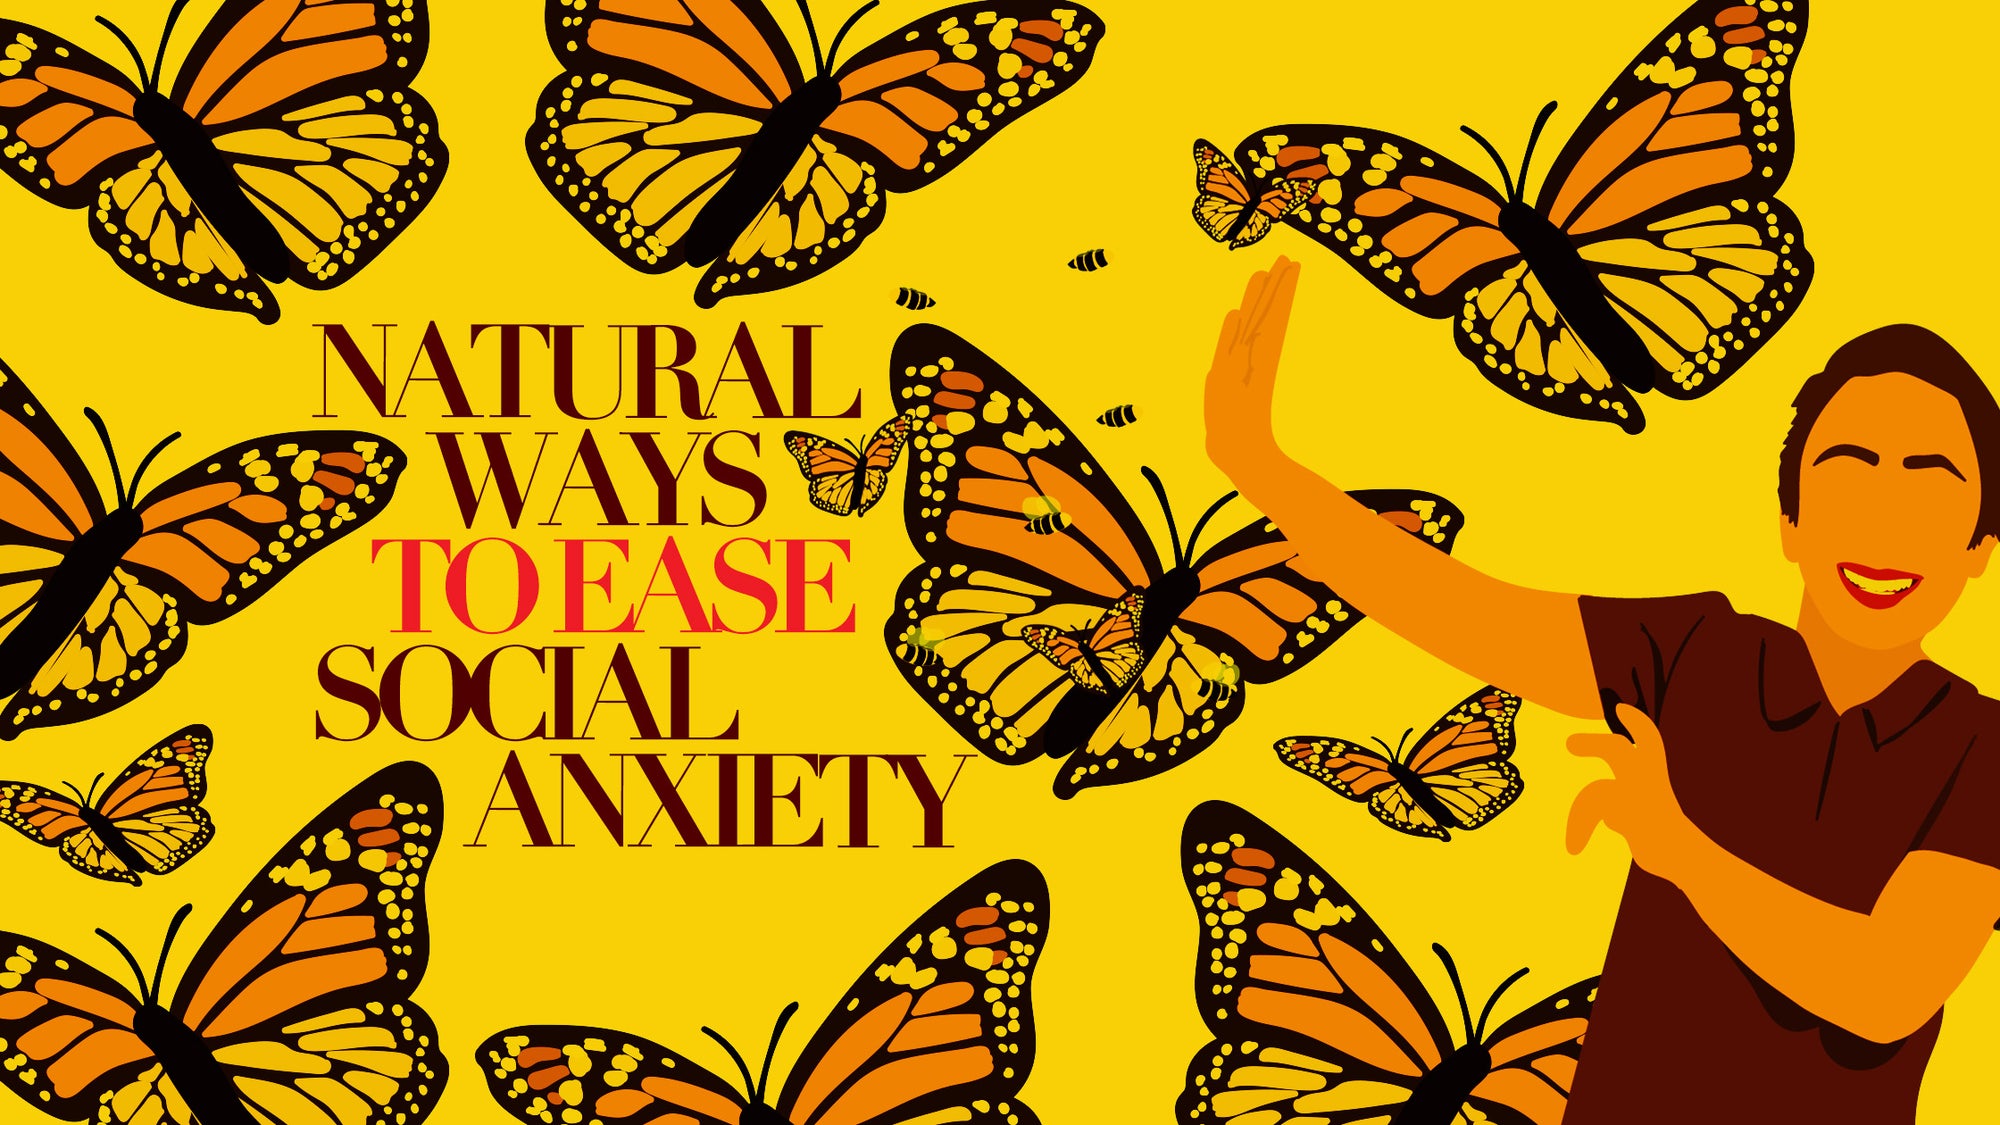 Natural Ways to Ease Social Anxiety from The Functional Chocolate Company